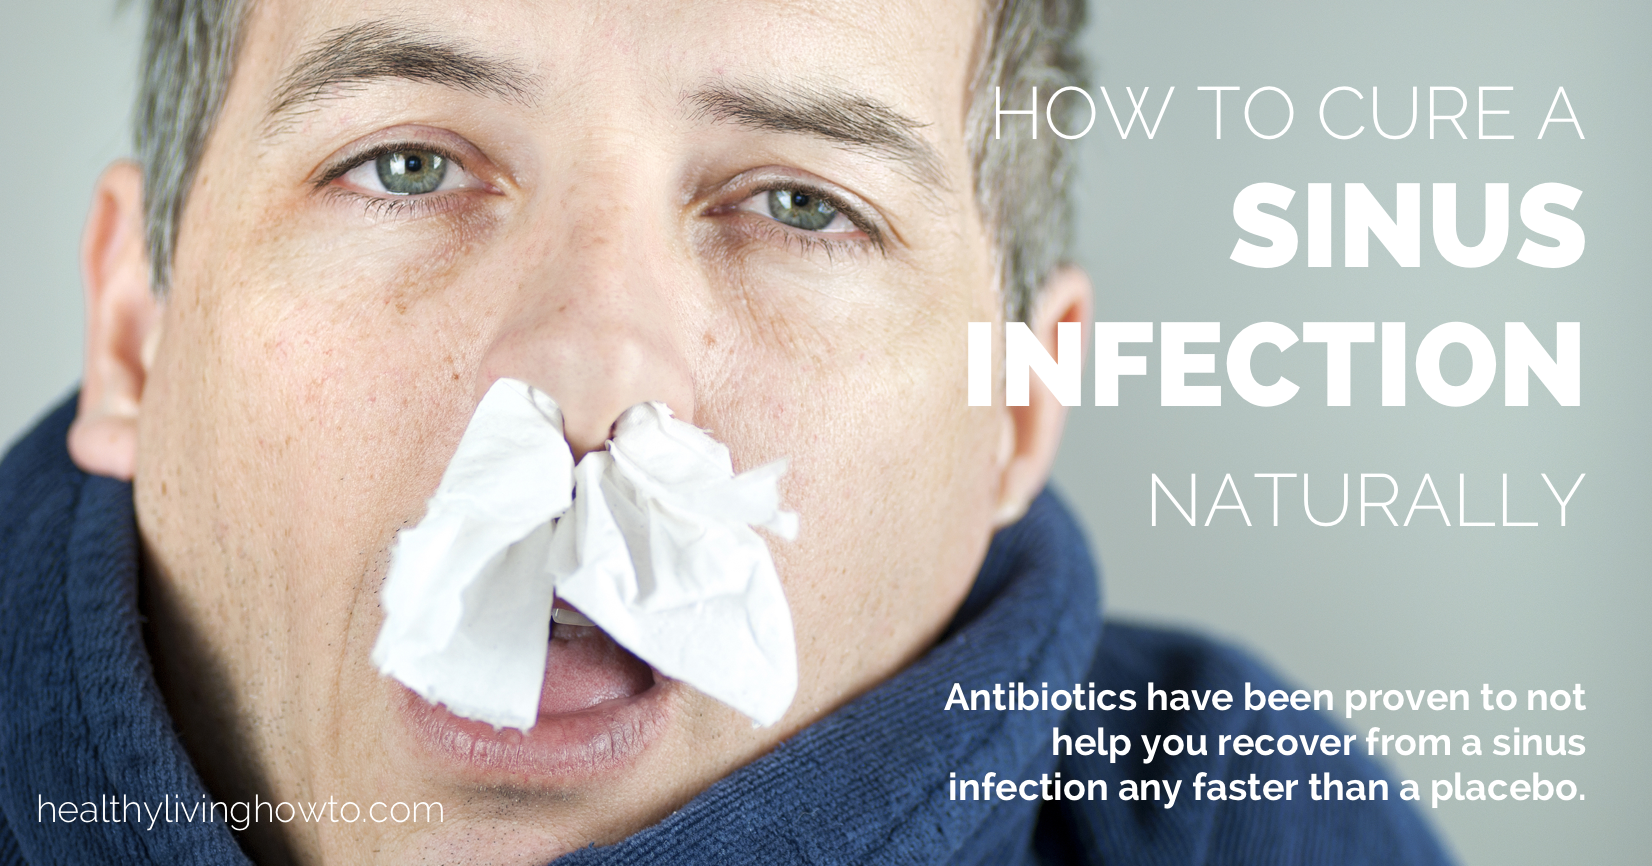 What are some medications for a sinus infection?